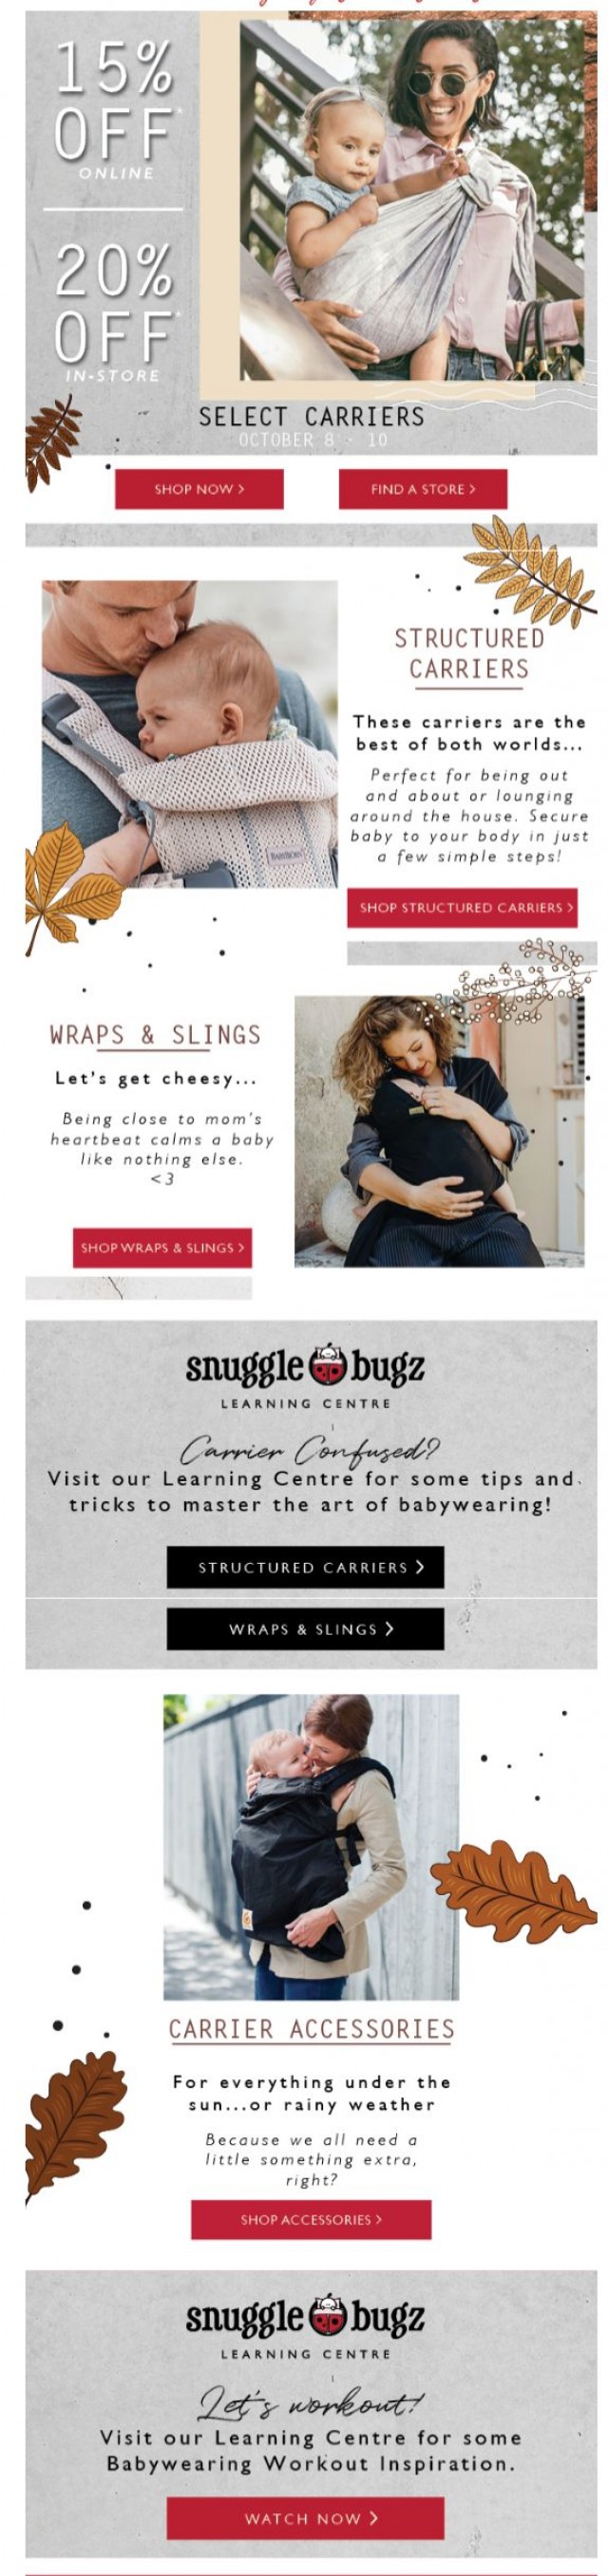 Coupon for: Snuggle Bugz - Get Carried Away with Up to 20% off Carriers!